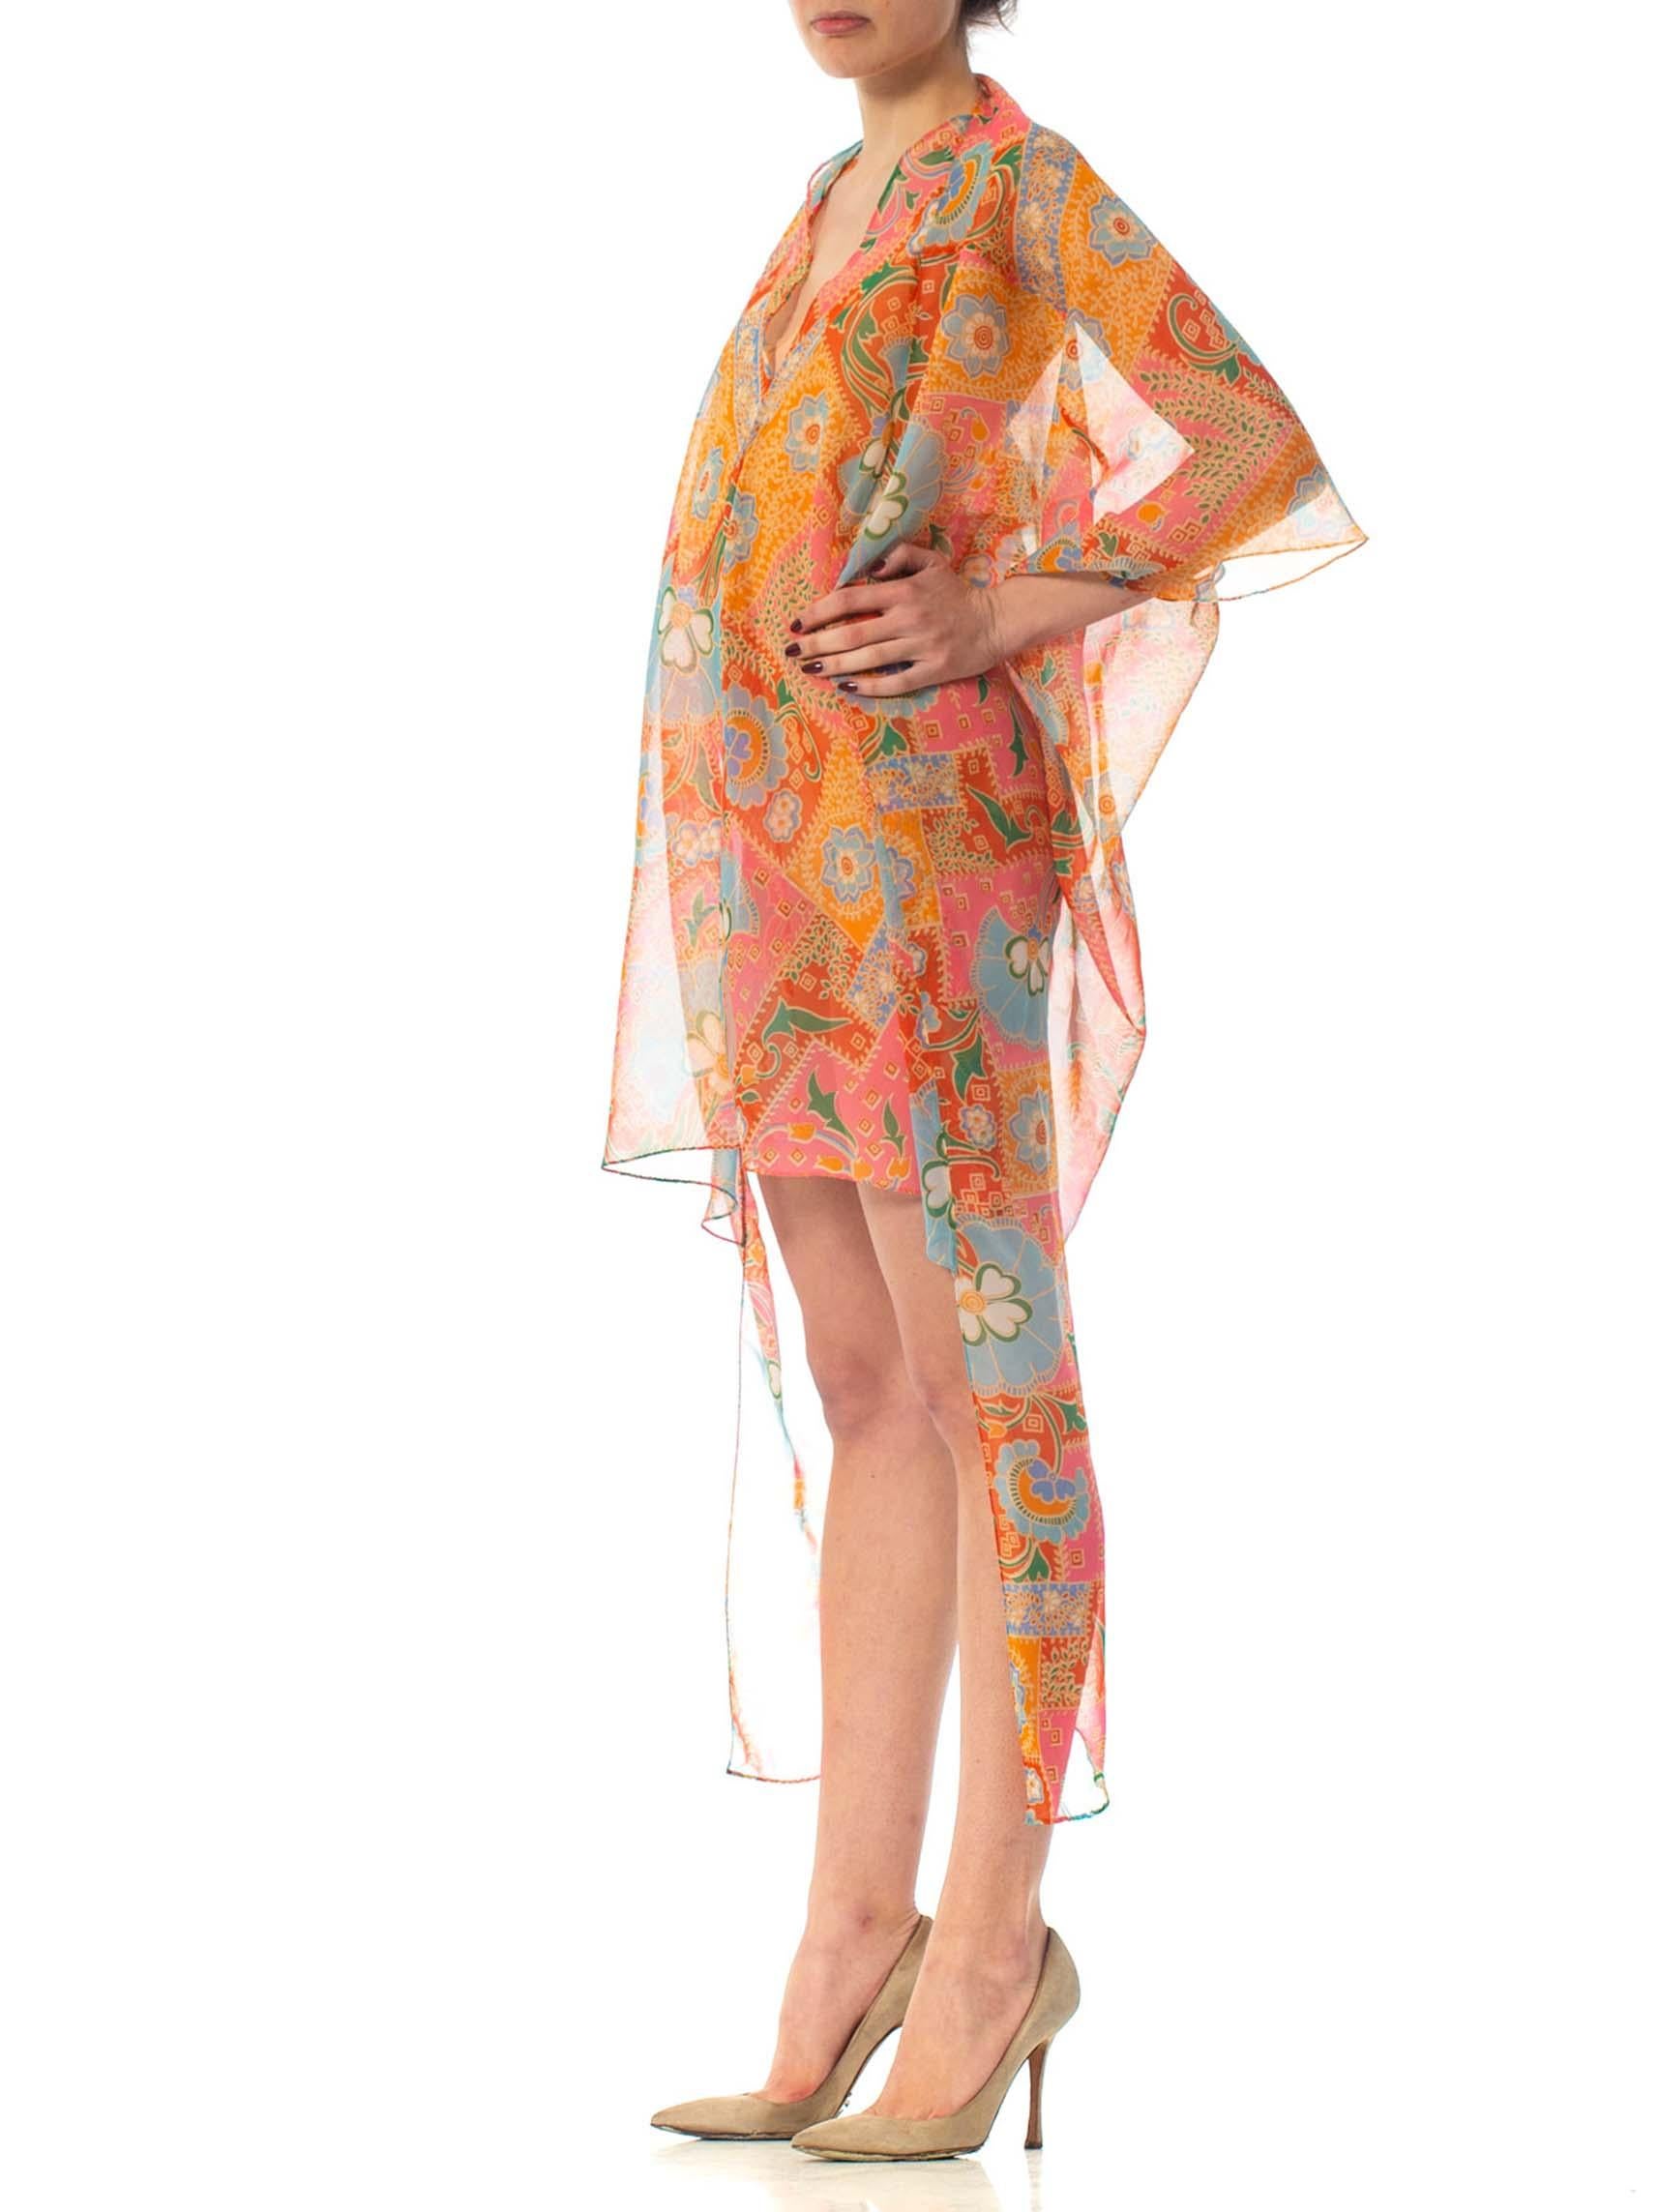 MORPHEW COLLECTION Psychedelic Polyester Organza Beach Cover-Up Cocoon 1